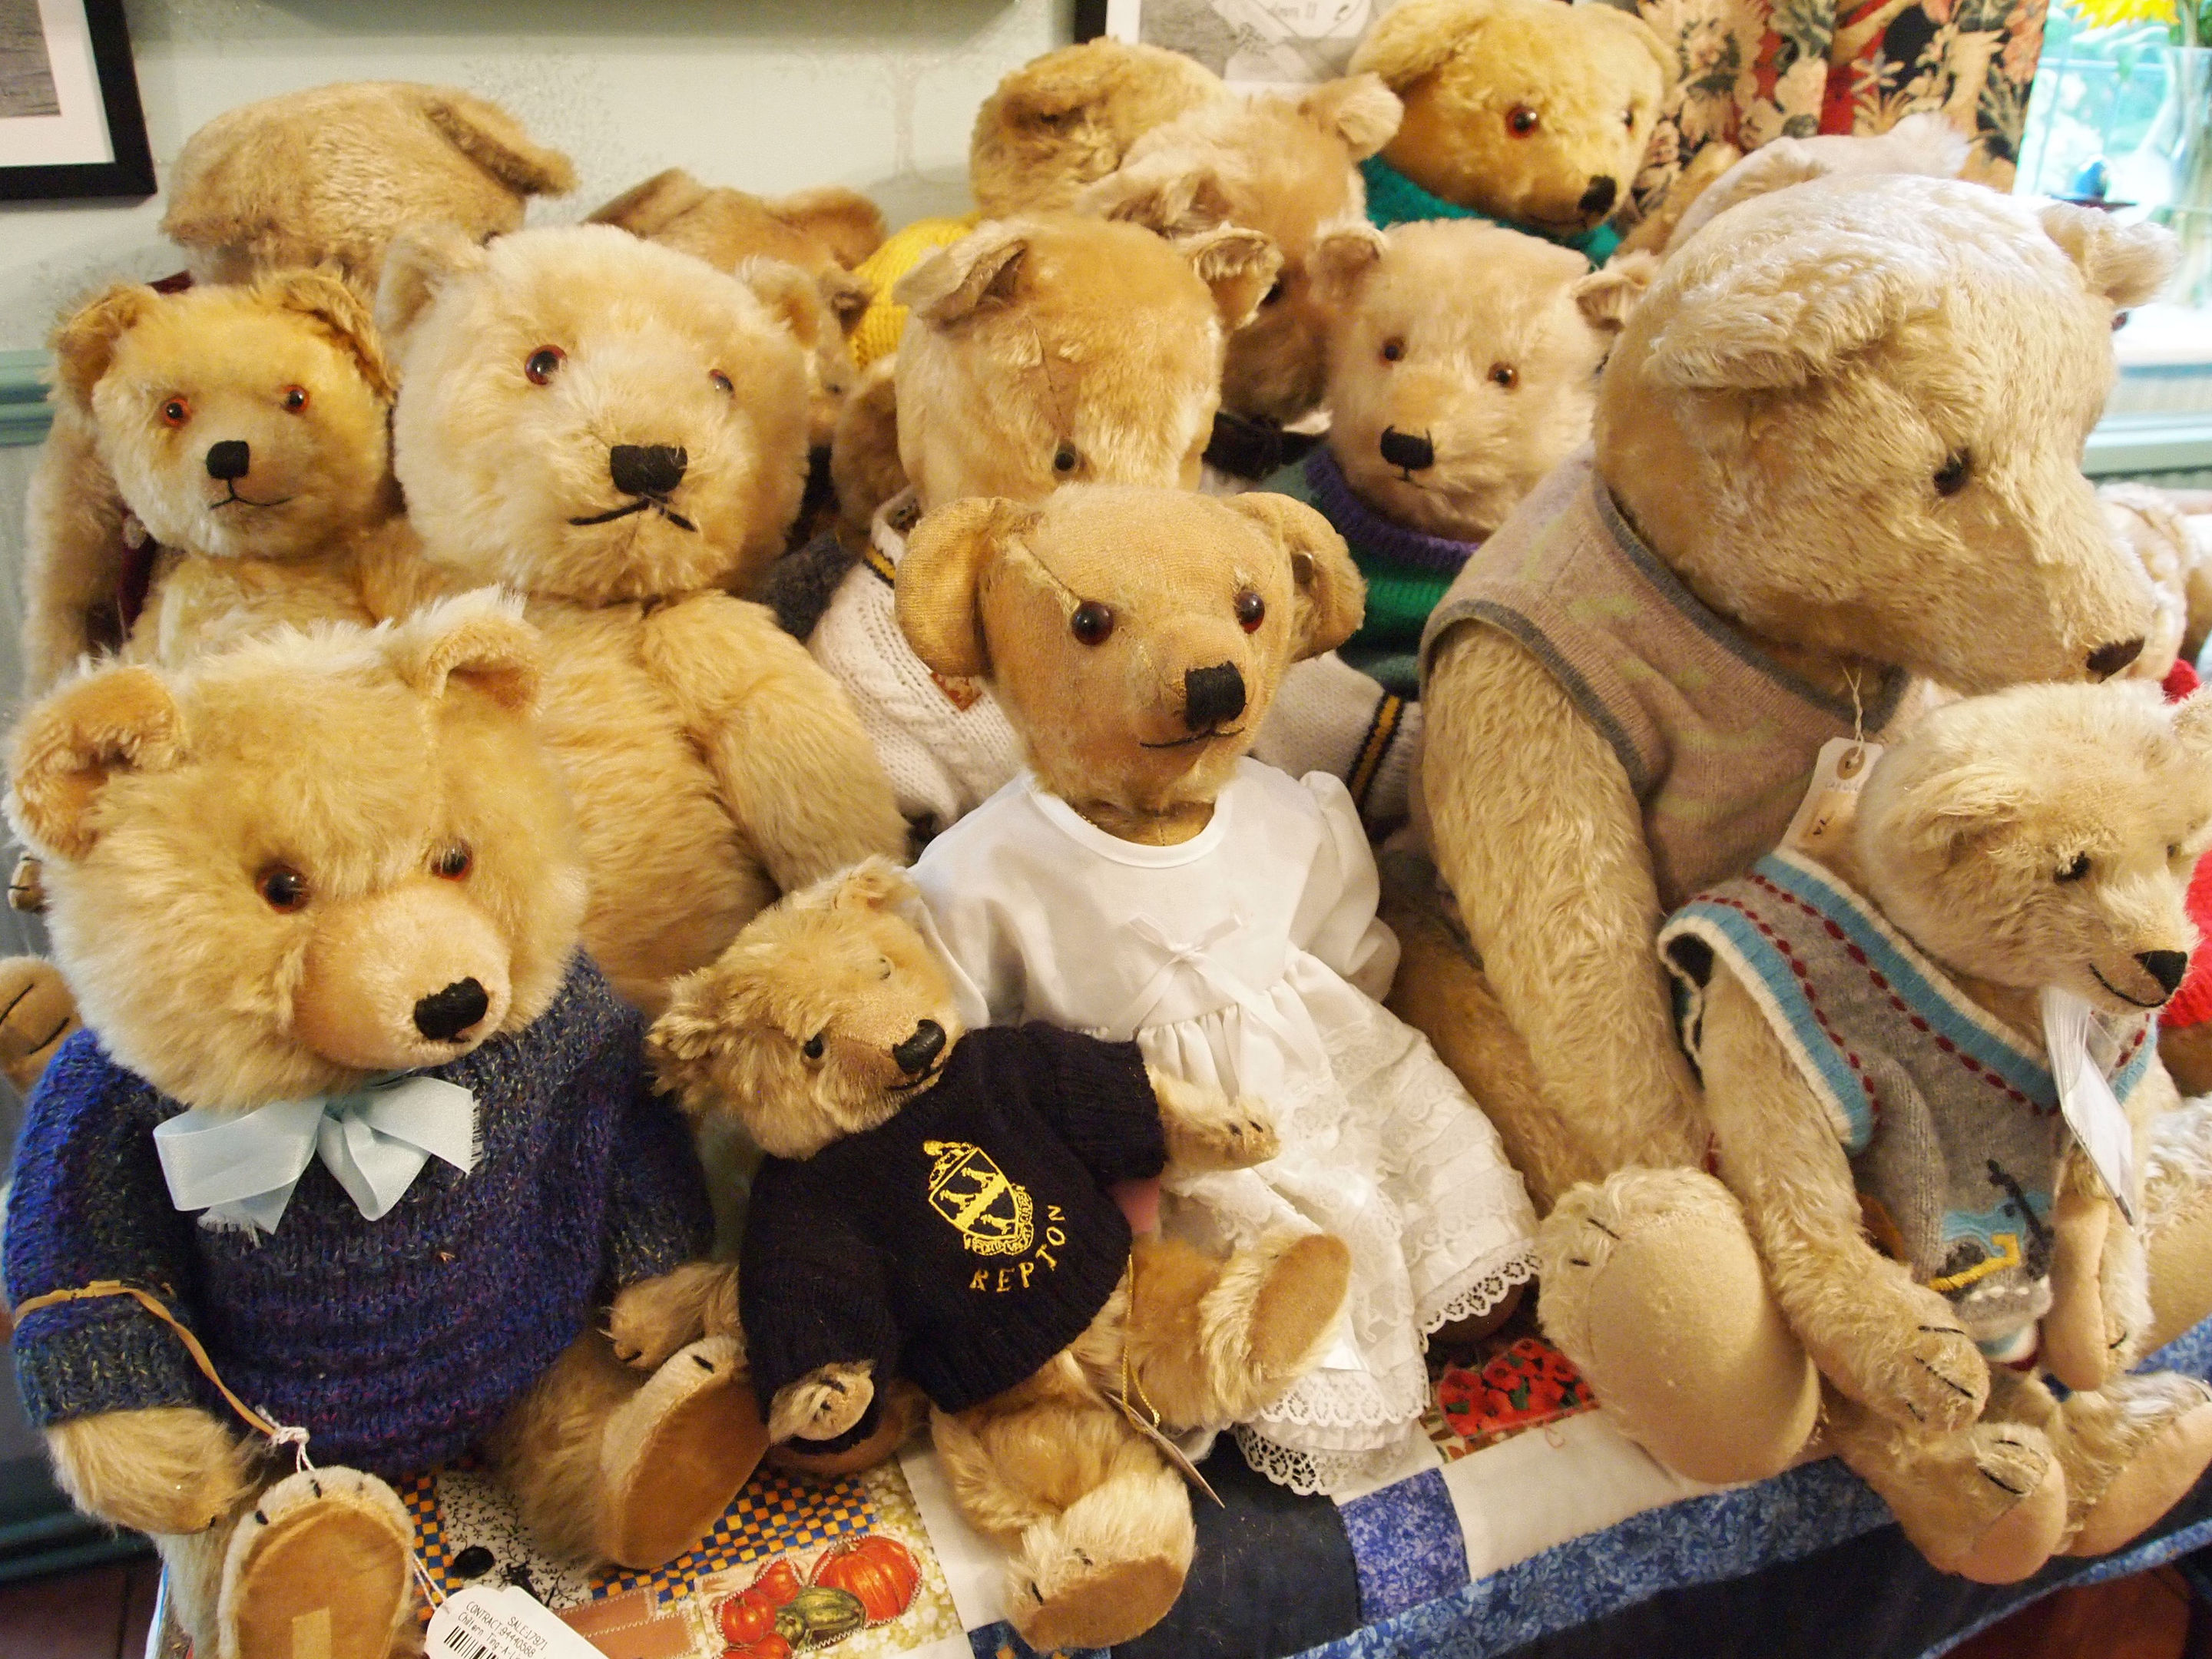 Some of the 35 bears owned by Jill Barker which she has collected over nearly half a century and are going under the hammer. (Hansons Auctioneers/PA Wire)